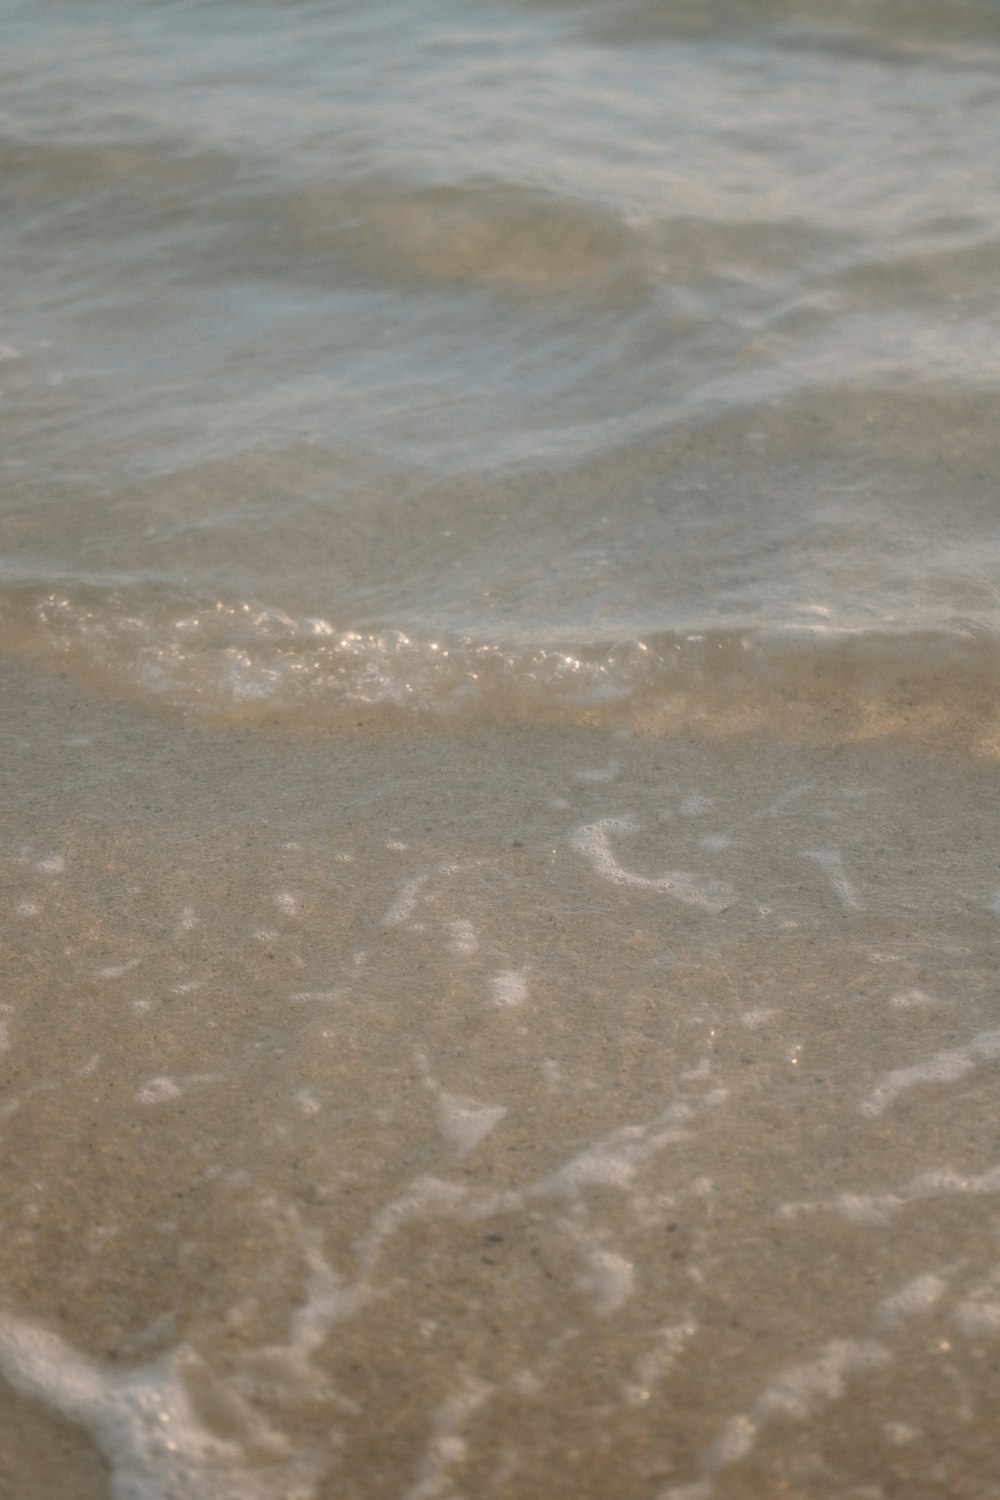 a close up of the sand and water at the beach